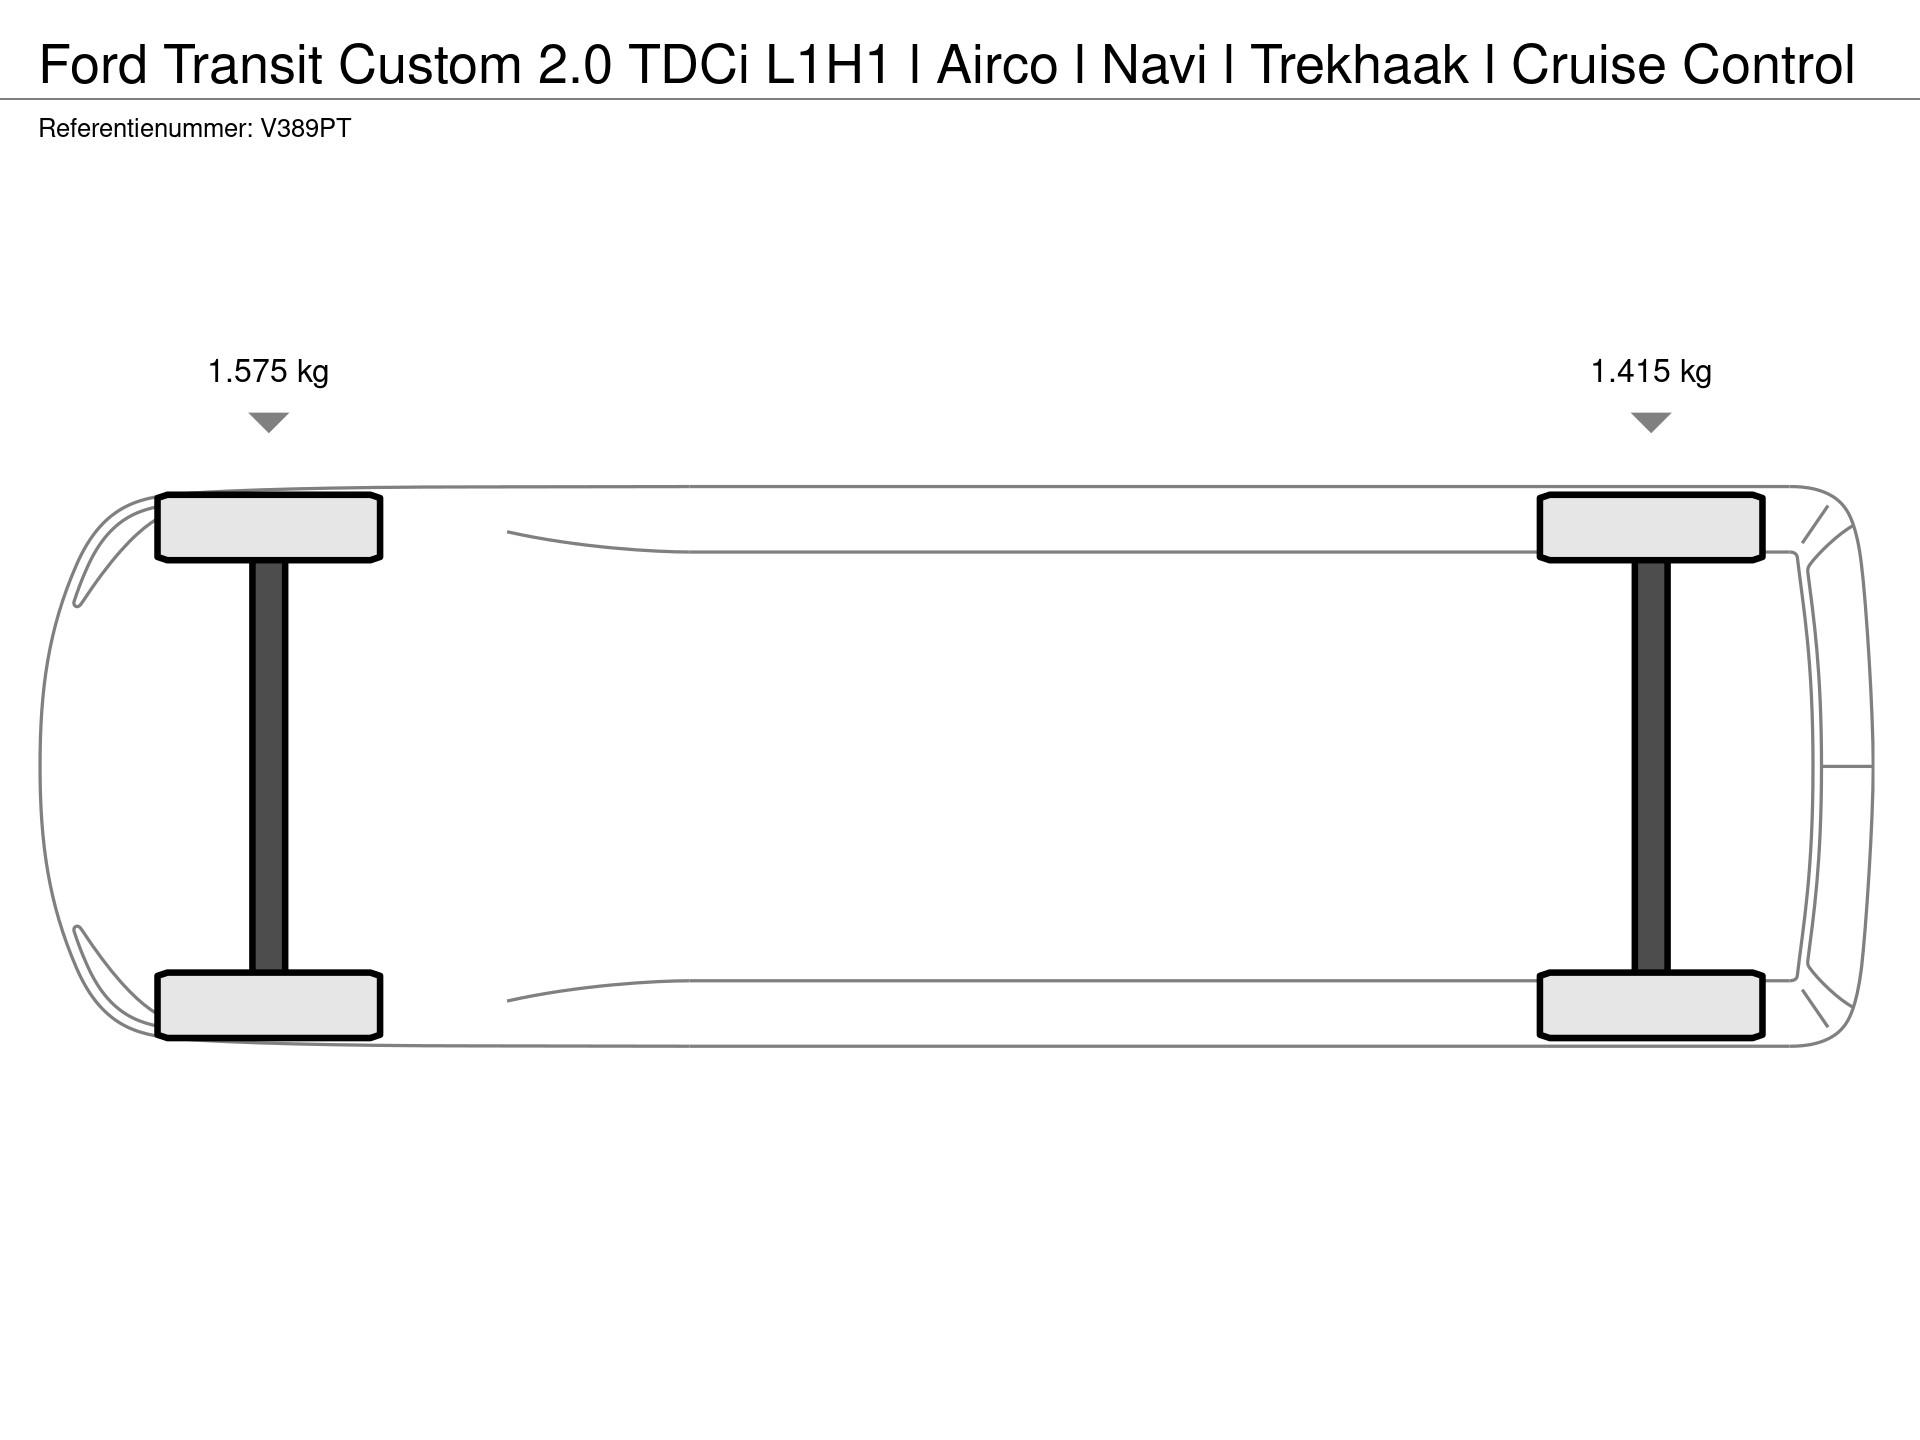 Graphical representation of the axle configuration